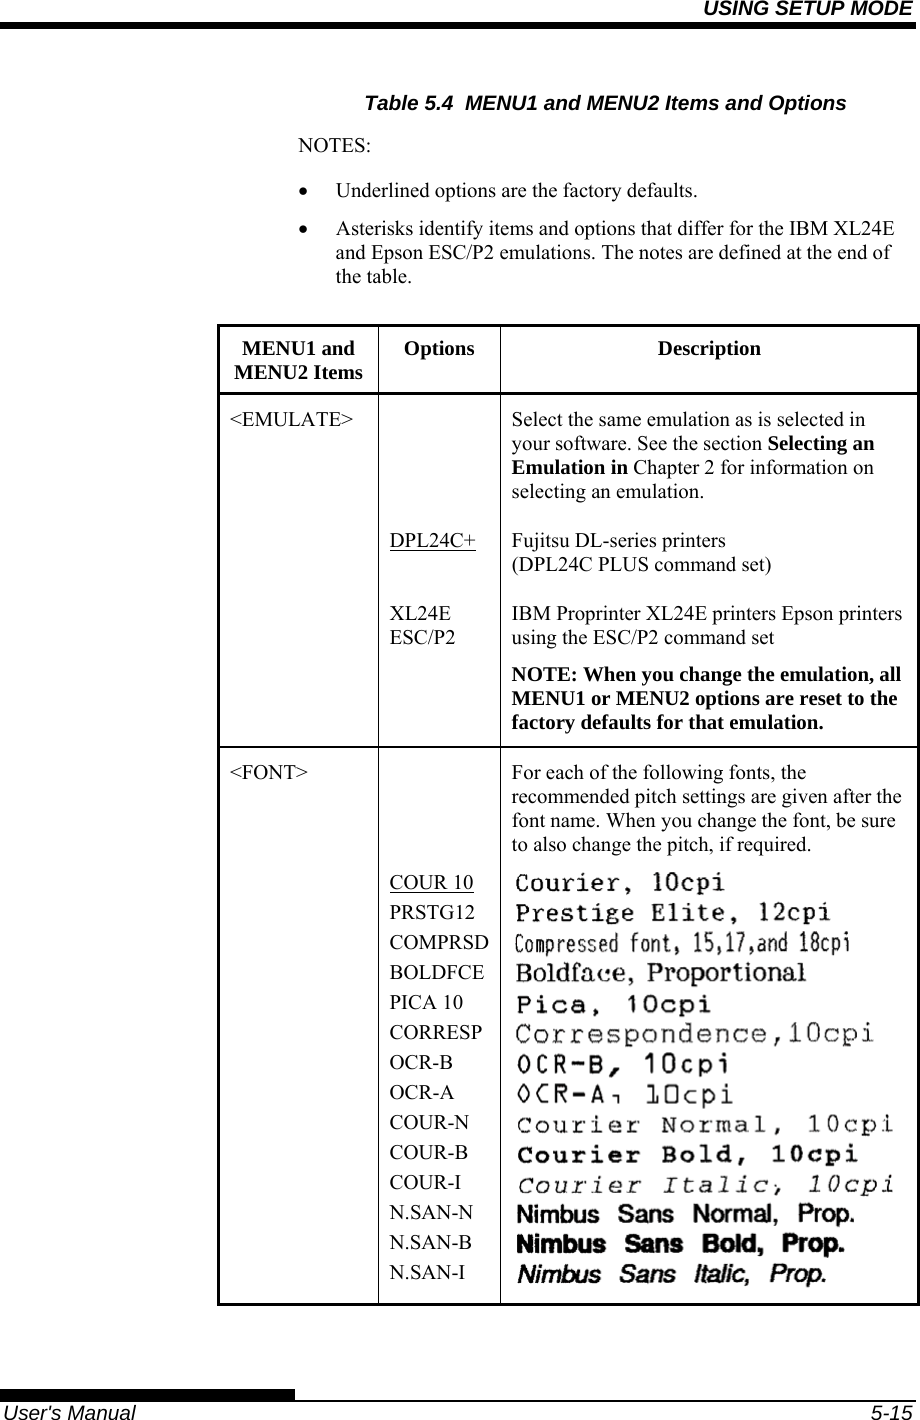 USING SETUP MODE   User&apos;s Manual  5-15 Table 5.4  MENU1 and MENU2 Items and Options NOTES: • Underlined options are the factory defaults. • Asterisks identify items and options that differ for the IBM XL24E and Epson ESC/P2 emulations. The notes are defined at the end of the table.  MENU1 and MENU2 Items Options Description &lt;EMULATE&gt;    Select the same emulation as is selected in your software. See the section Selecting an Emulation in Chapter 2 for information on selecting an emulation.  DPL24C+  Fujitsu DL-series printers  (DPL24C PLUS command set)  XL24E ESC/P2 IBM Proprinter XL24E printers Epson printers using the ESC/P2 command set NOTE: When you change the emulation, all MENU1 or MENU2 options are reset to the factory defaults for that emulation. &lt;FONT&gt;    COUR 10 PRSTG12 COMPRSDBOLDFCEPICA 10 CORRESPOCR-B OCR-A COUR-N COUR-B COUR-I N.SAN-N N.SAN-B N.SAN-I For each of the following fonts, the recommended pitch settings are given after the font name. When you change the font, be sure to also change the pitch, if required. 